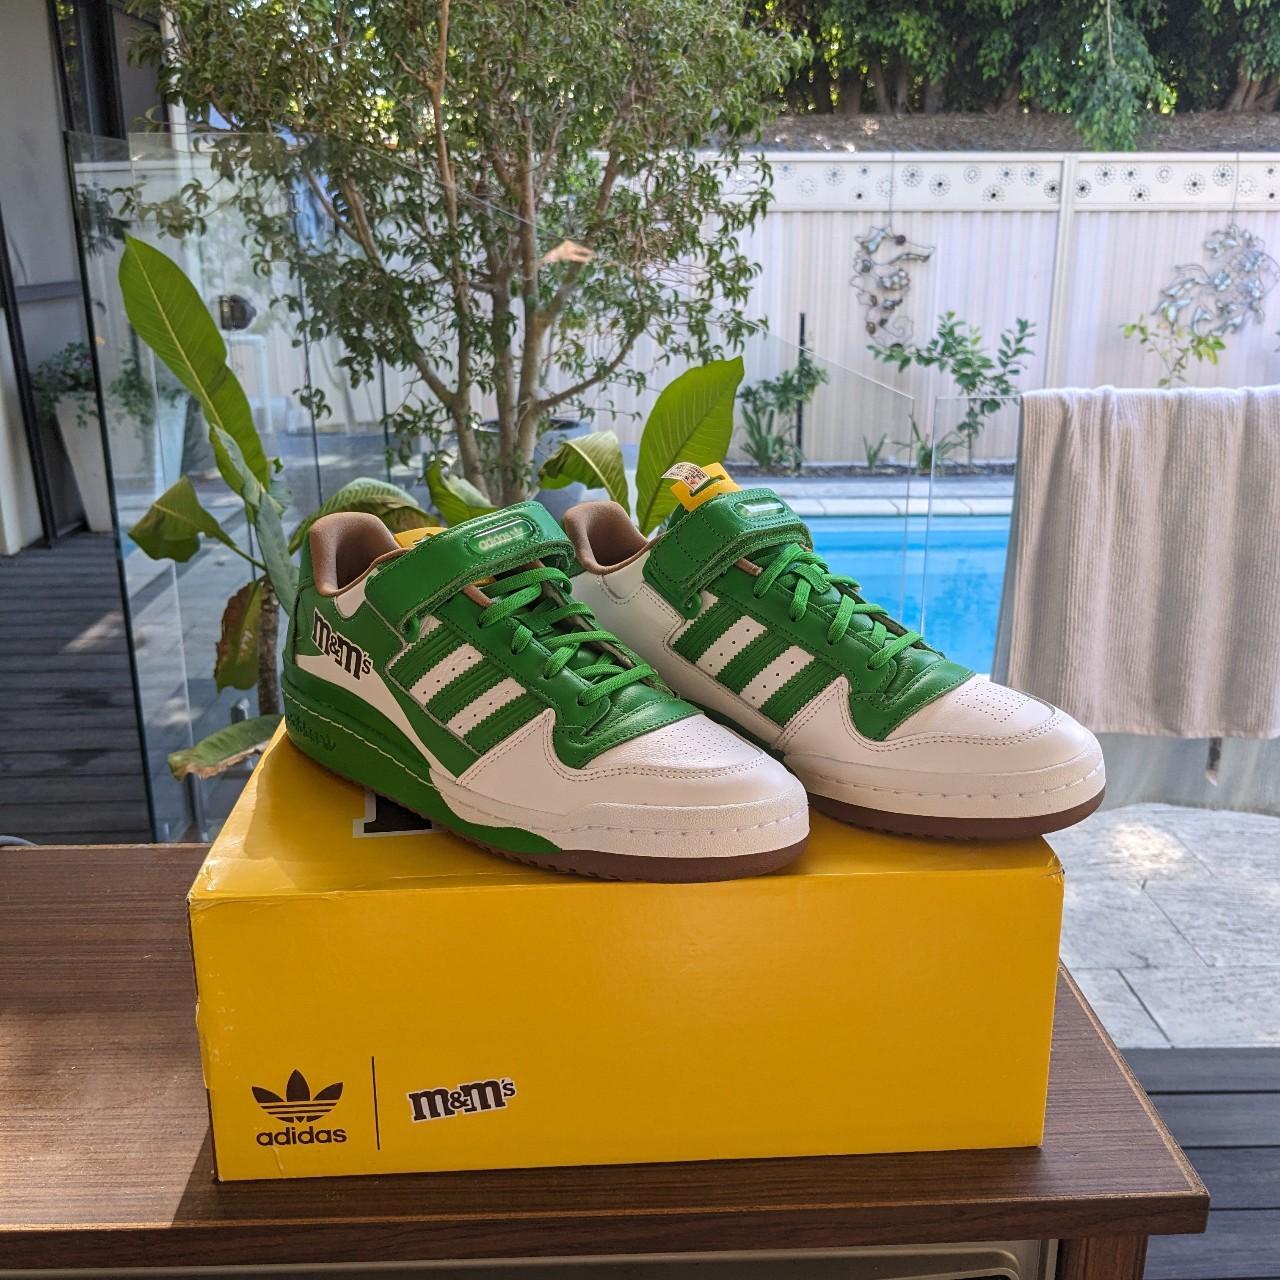 SALE爆買いadidas M&M’S Brand Forum Low 84 靴